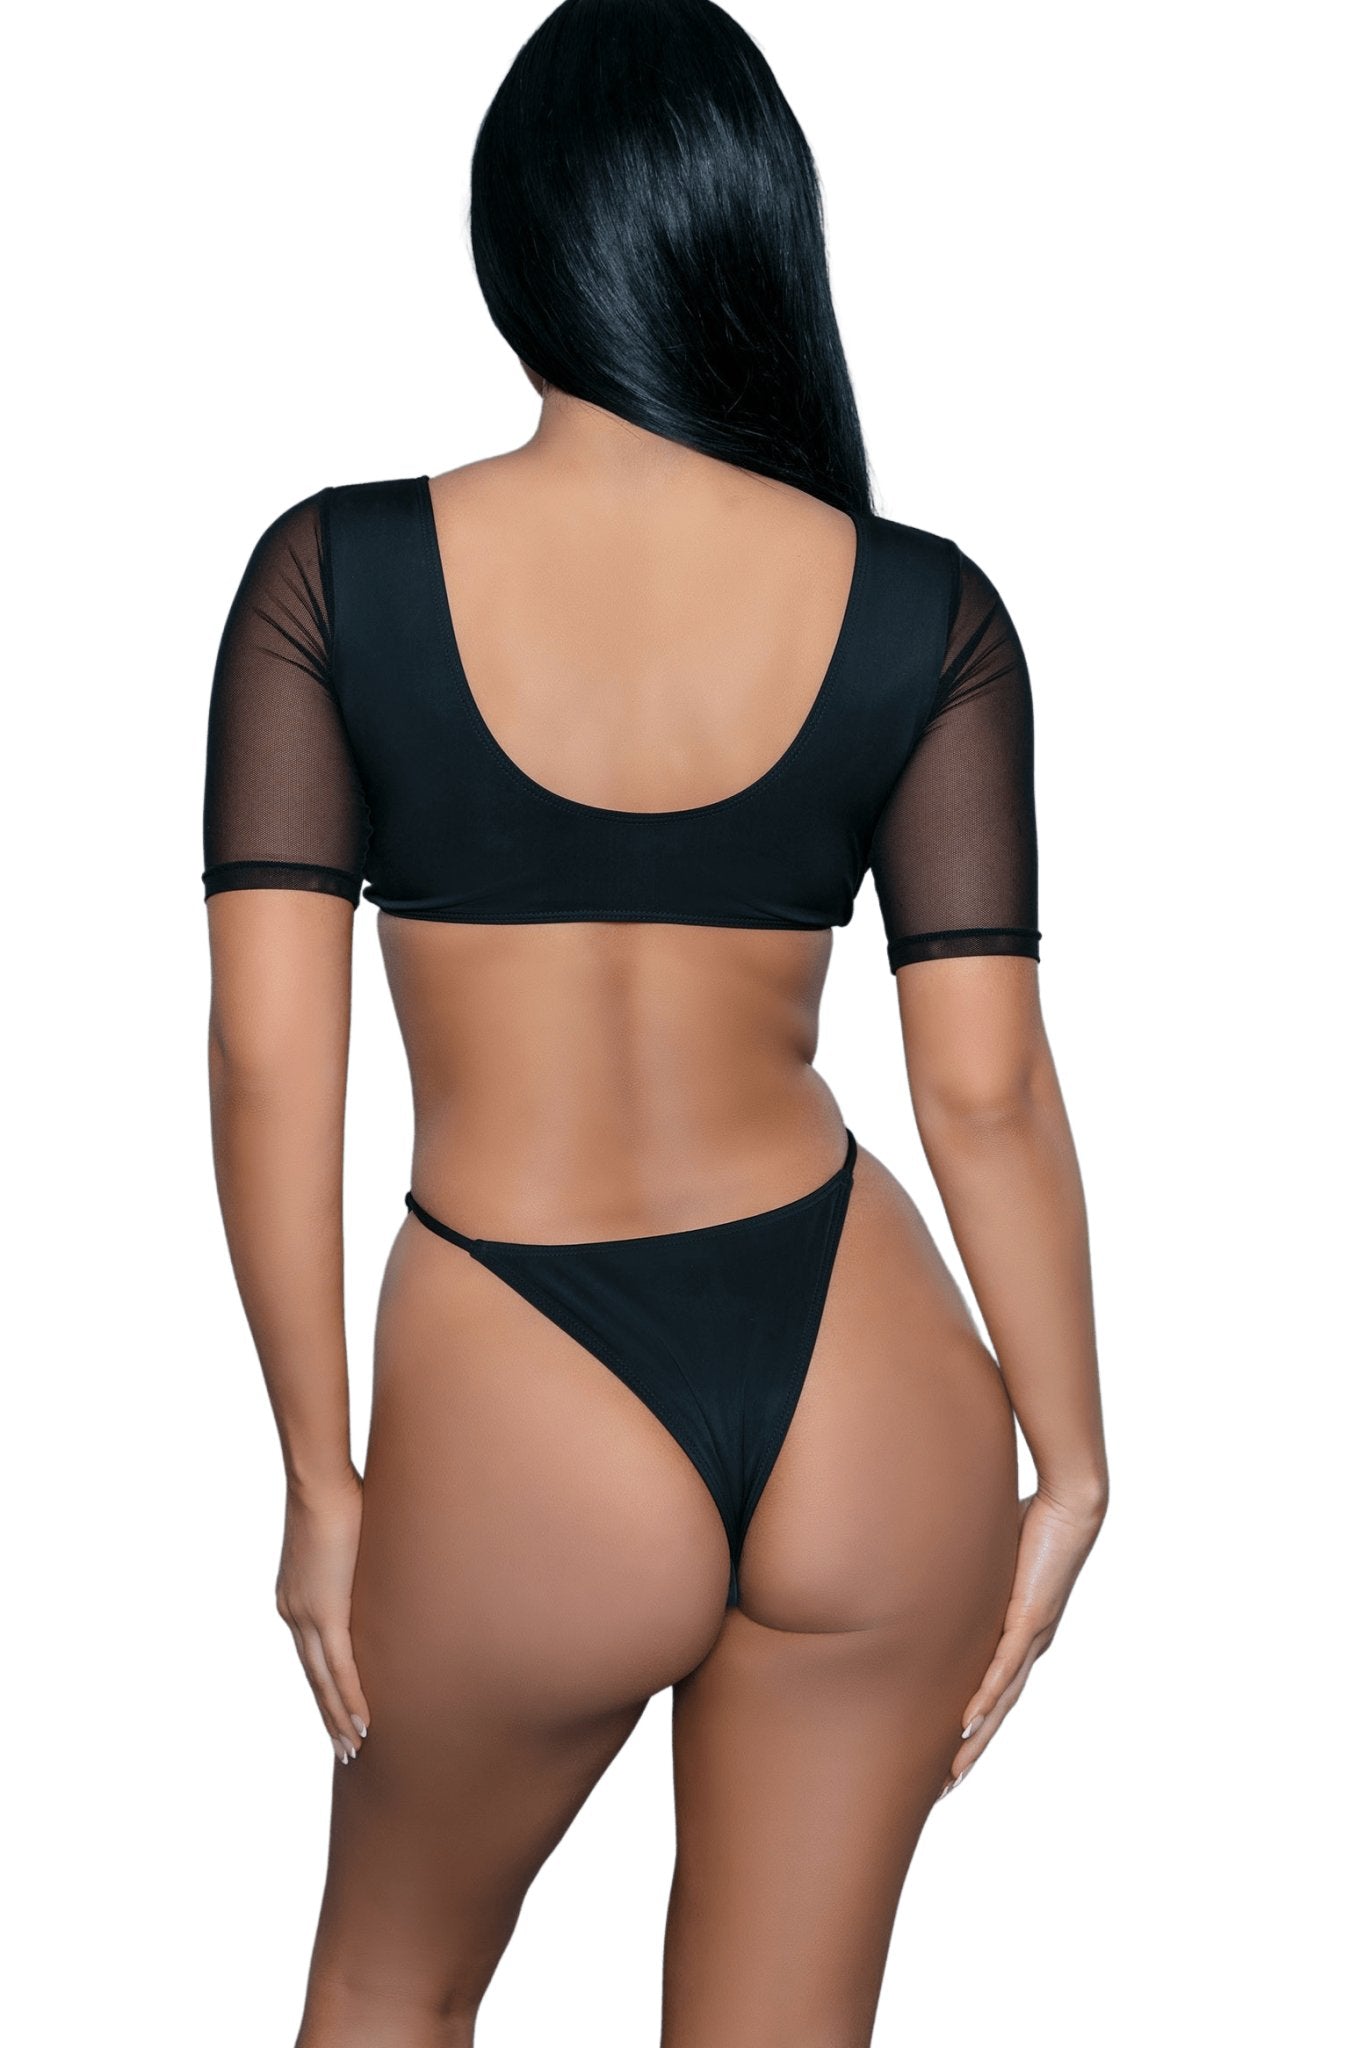 Diva Mesh Sleeved One Piece Swimsuit Musotica.com